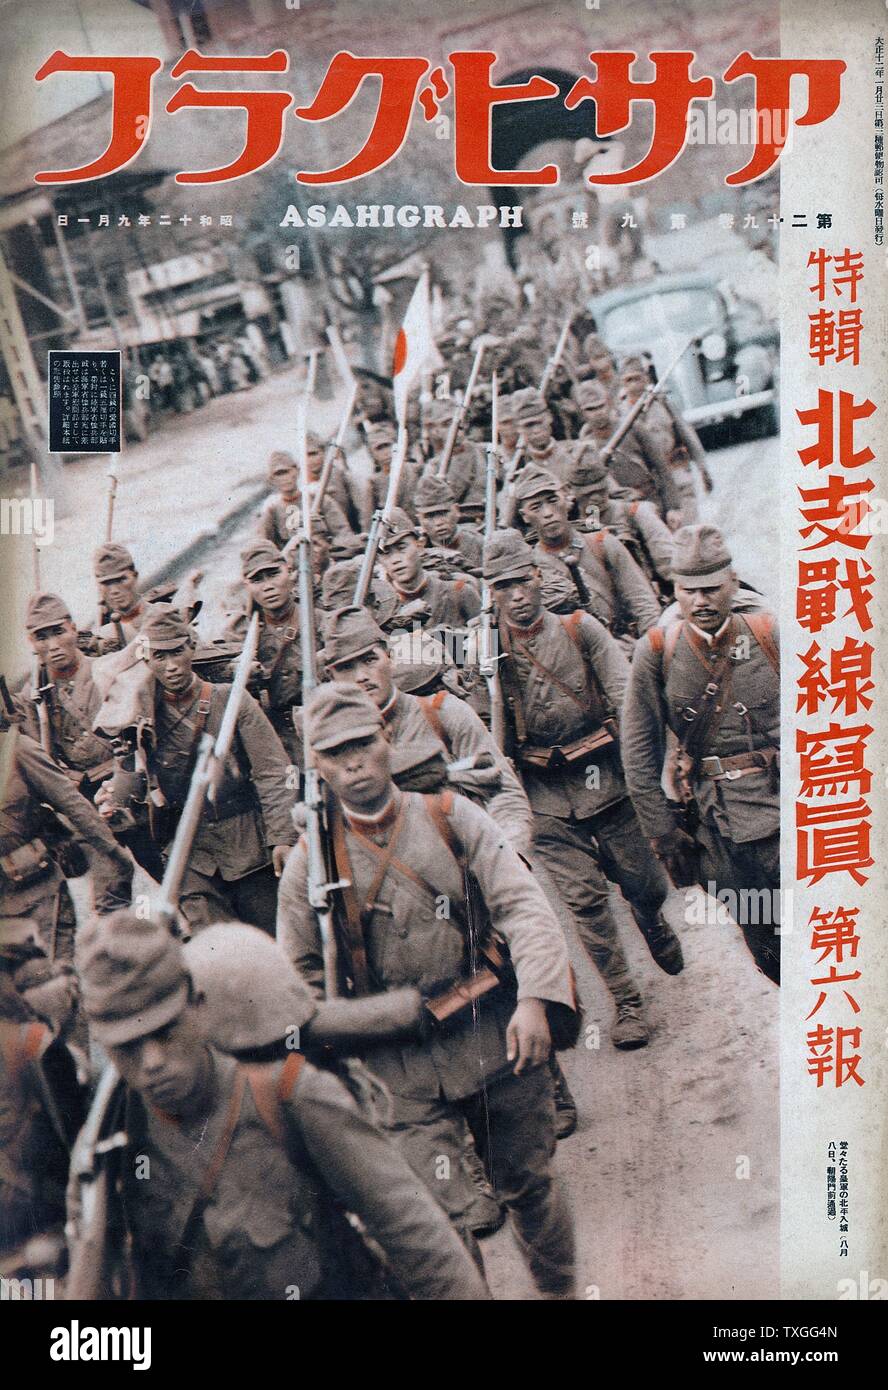 Japanese soldiers entering China during the invasion of 1937 Stock Photo